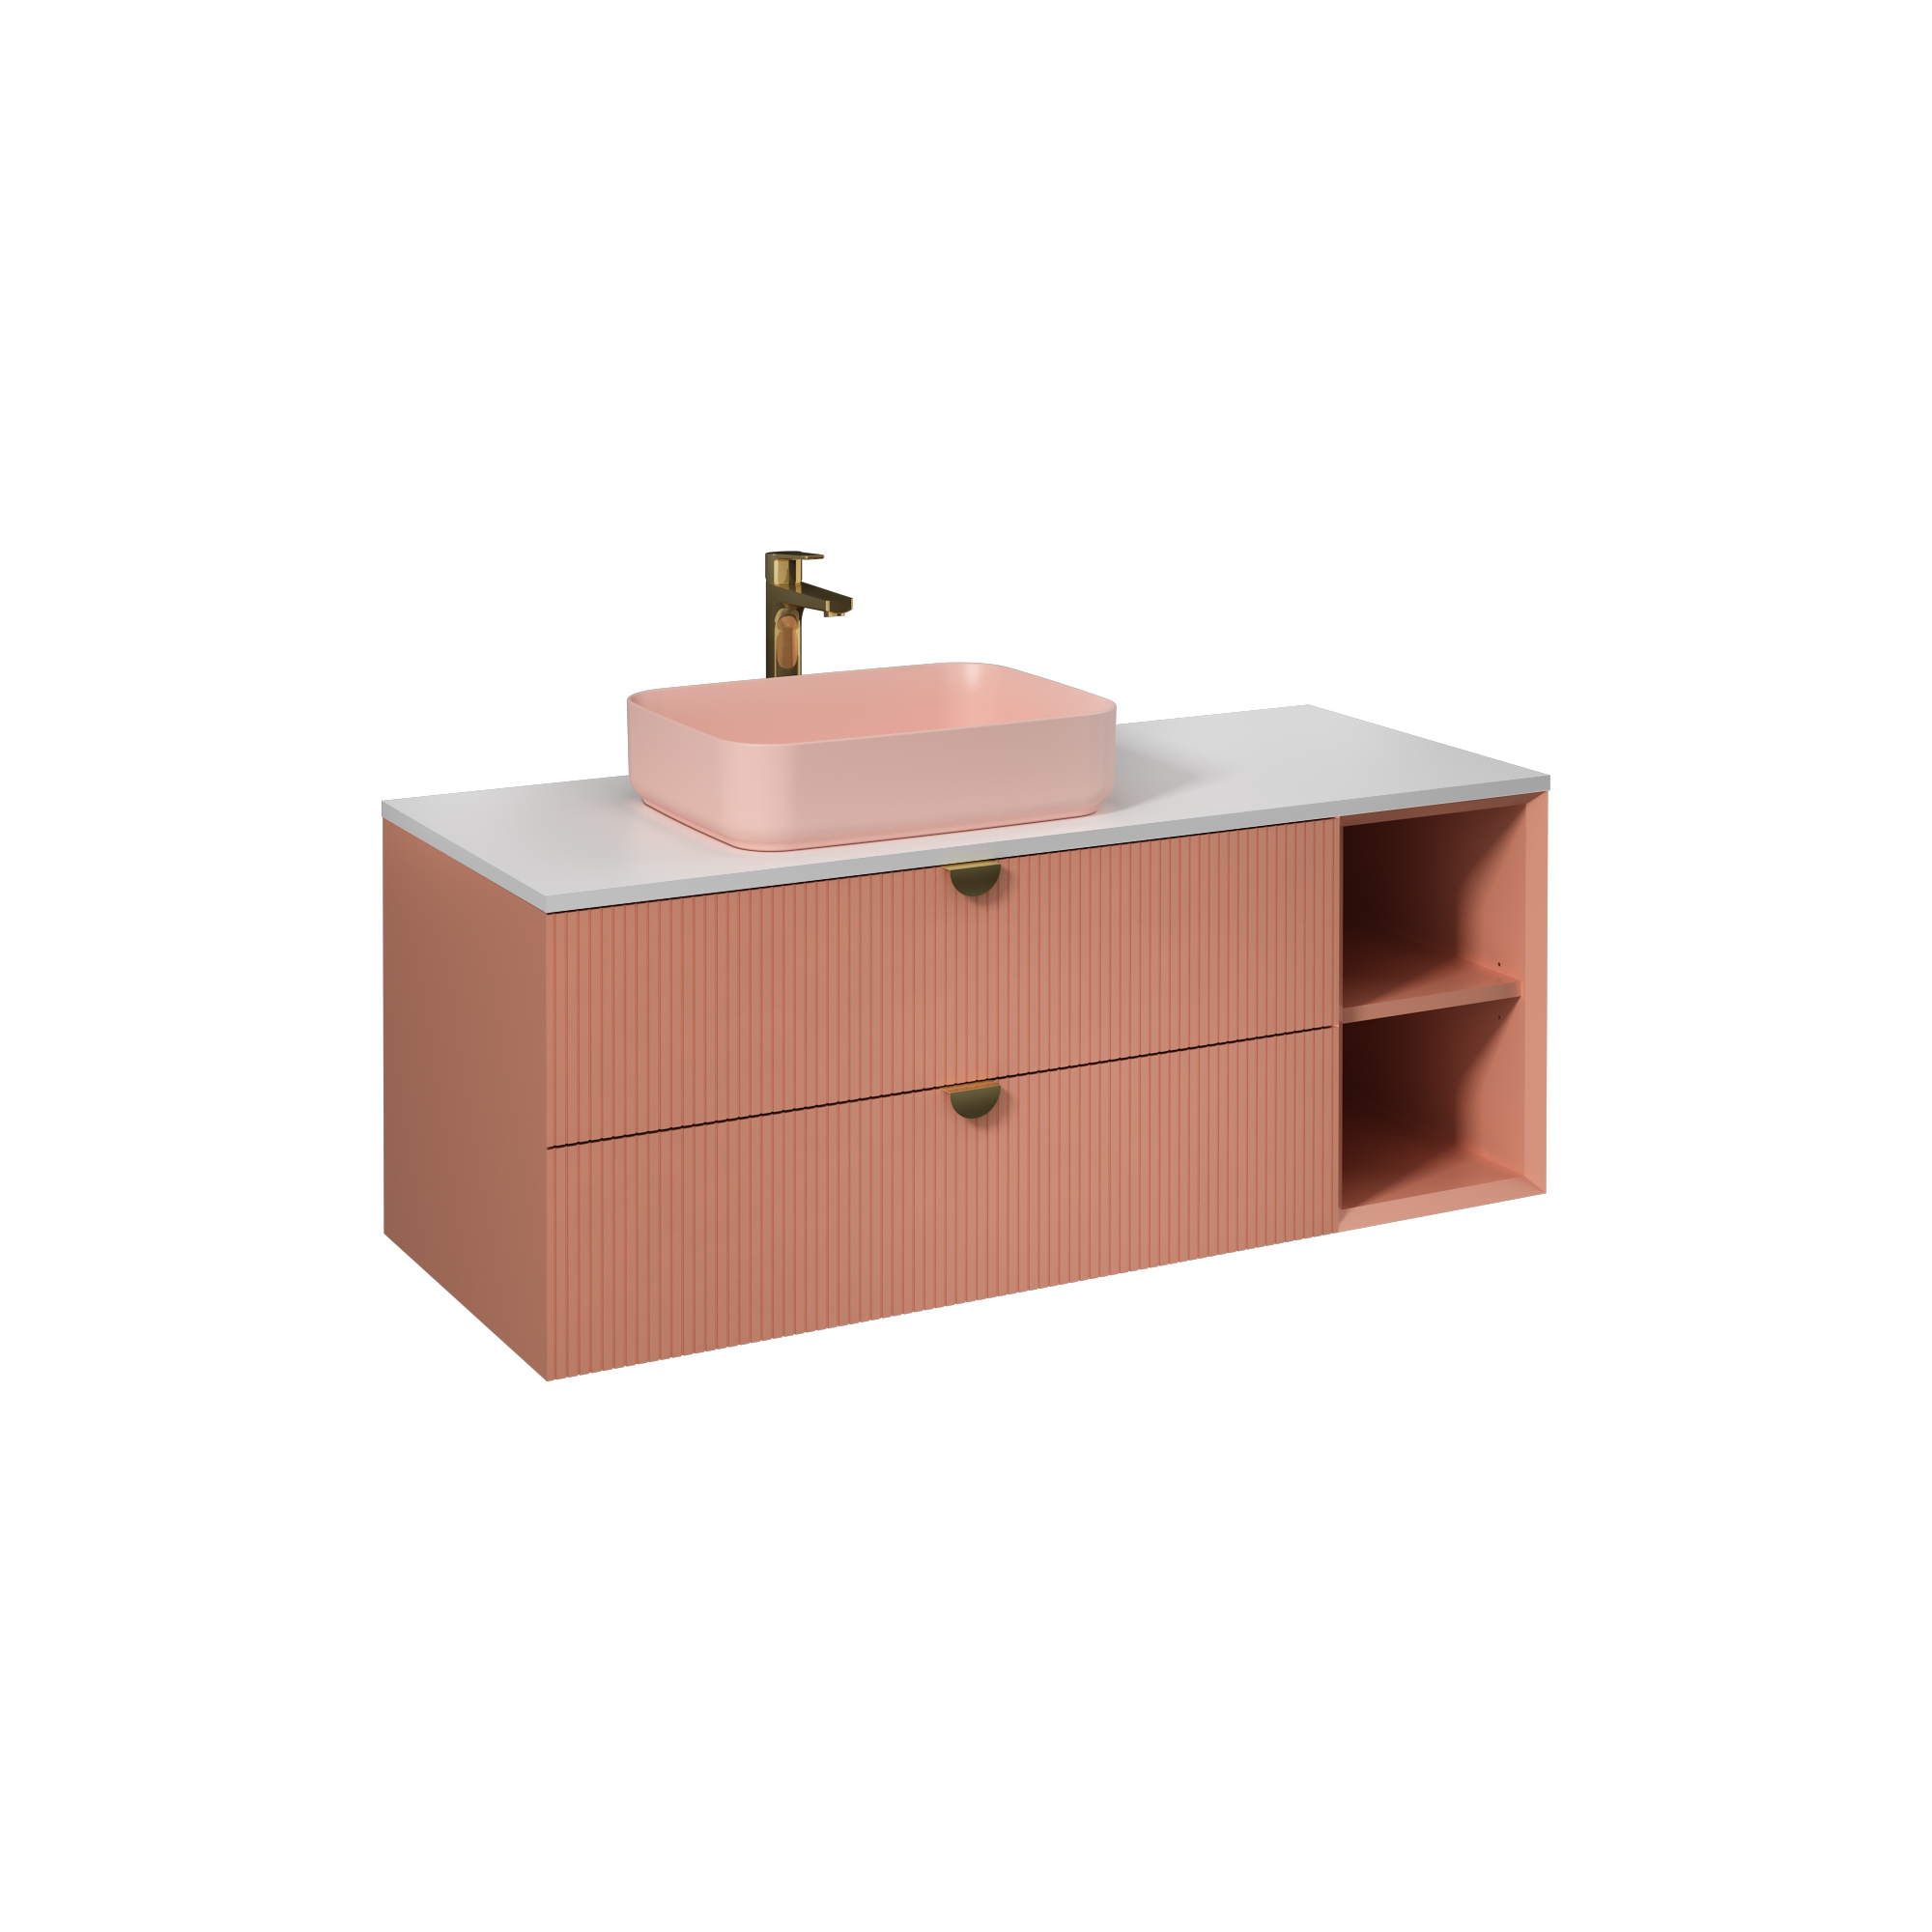 Infinity Washbasin Cabinet Ruby Red,  with Rustic Maroon Washbasin 130 cm